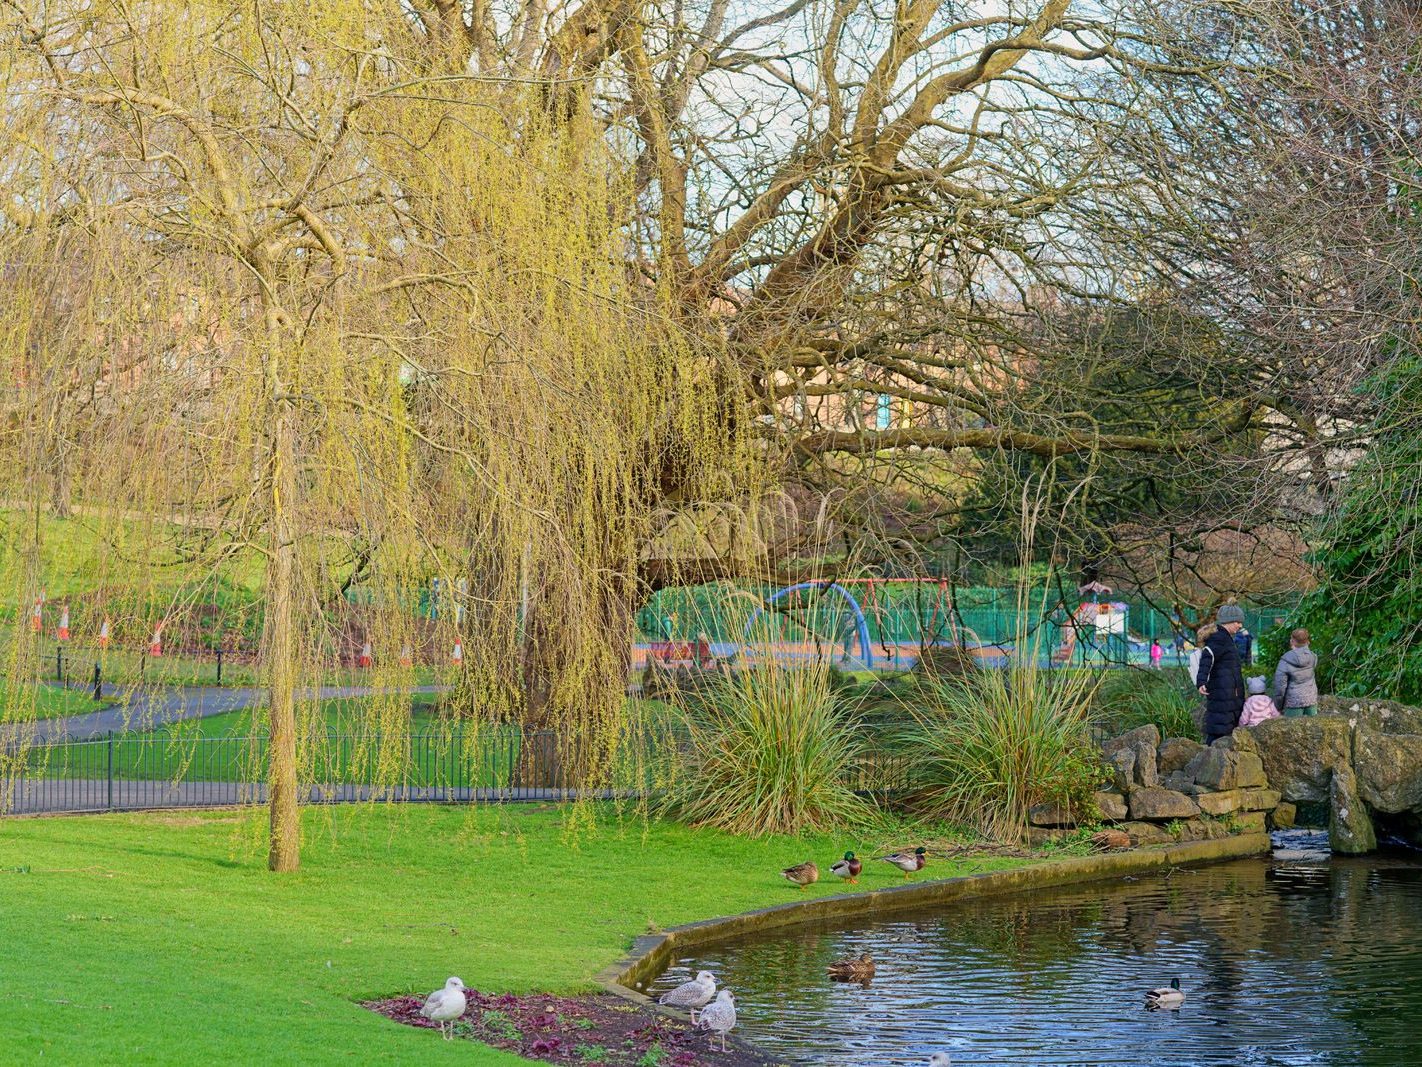 THE PEOPLES FLOWER GARDENS IN PHOENIX PARK [I USED AN 85MM LENS]-228544-1